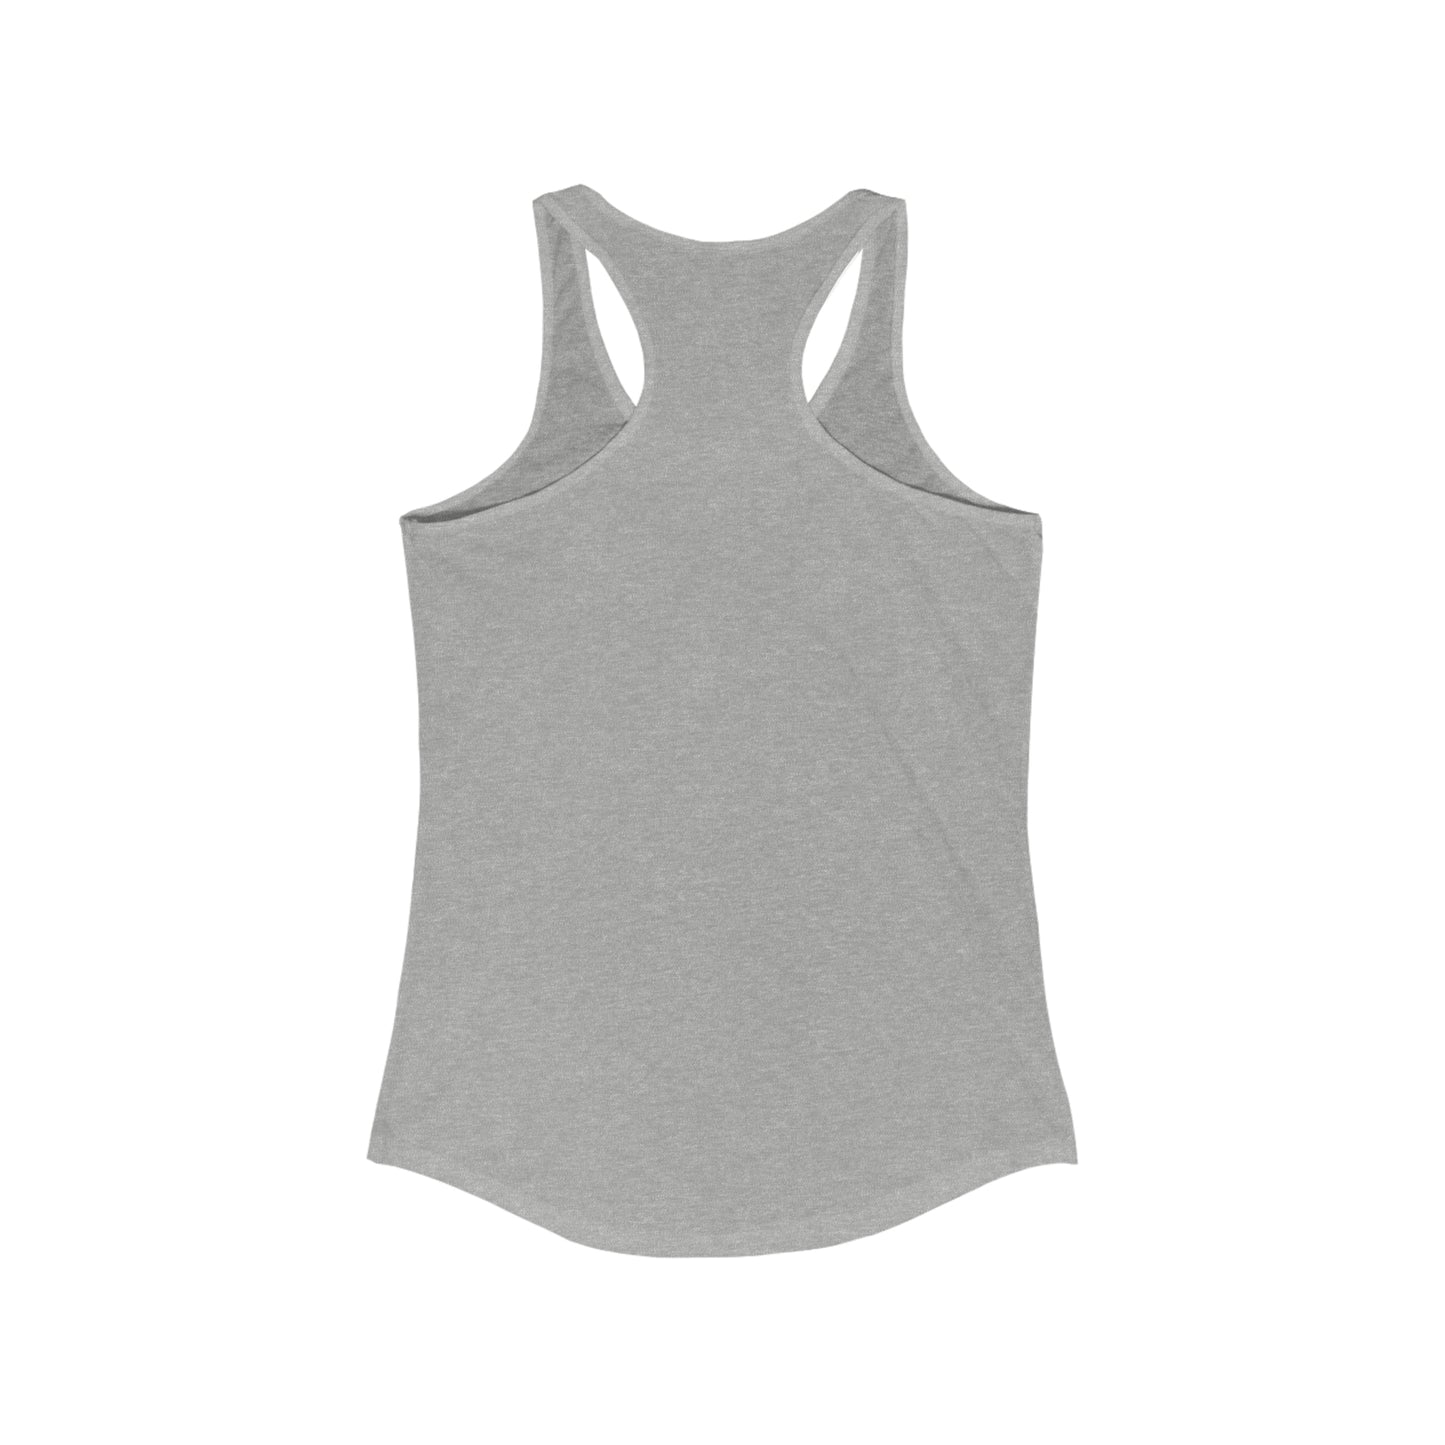 Women's Tennis and pickle ball tank